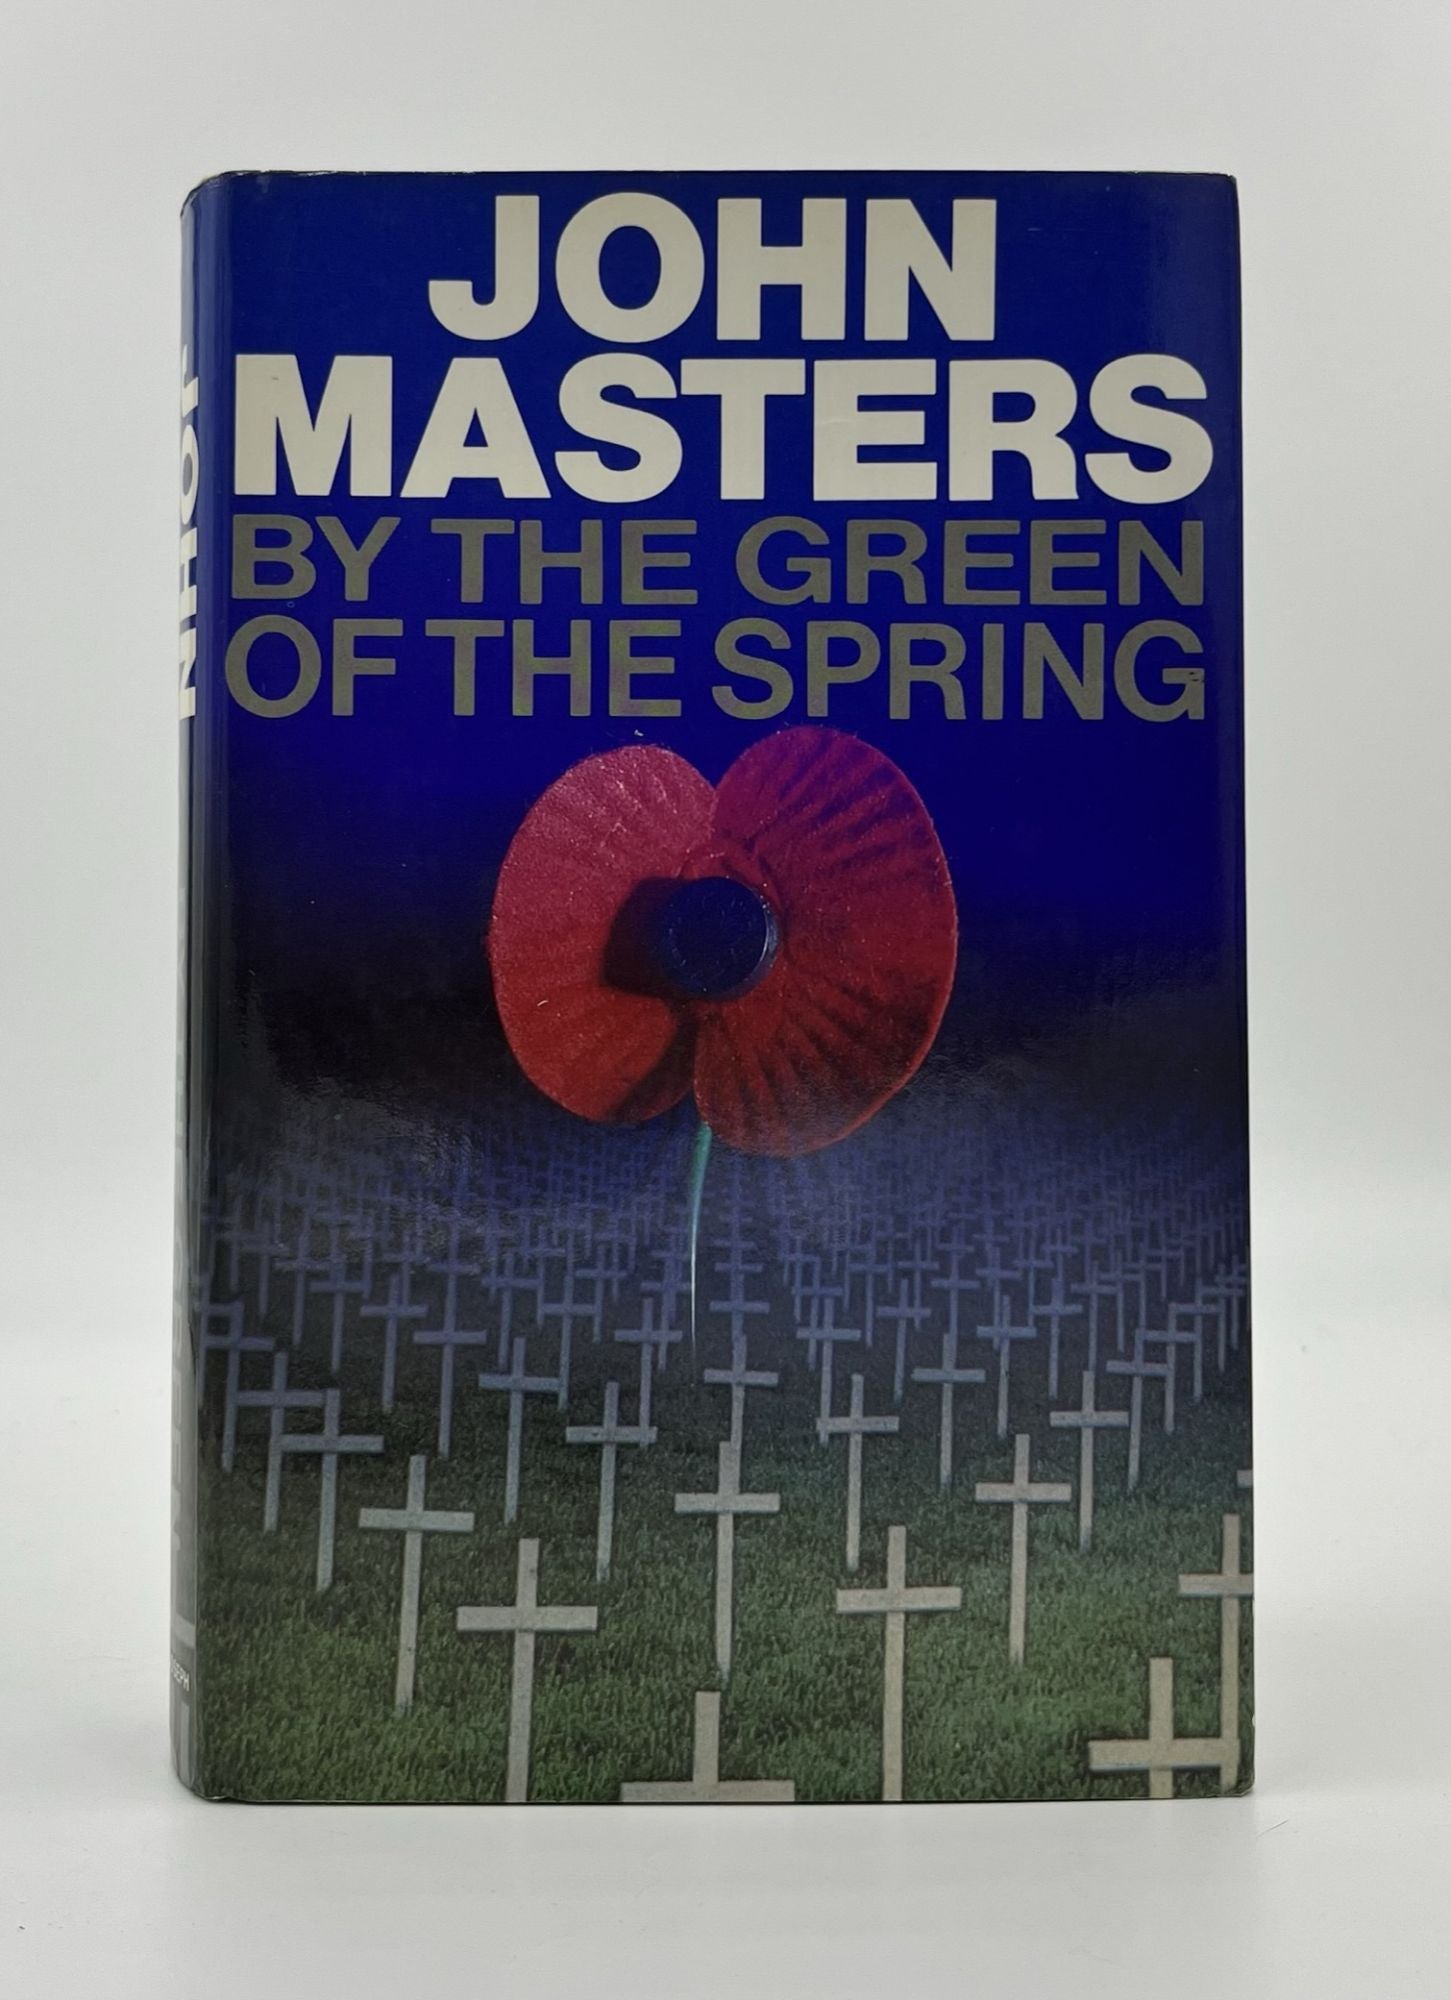 Book #160338 By the Green of the Spring. John Masters.